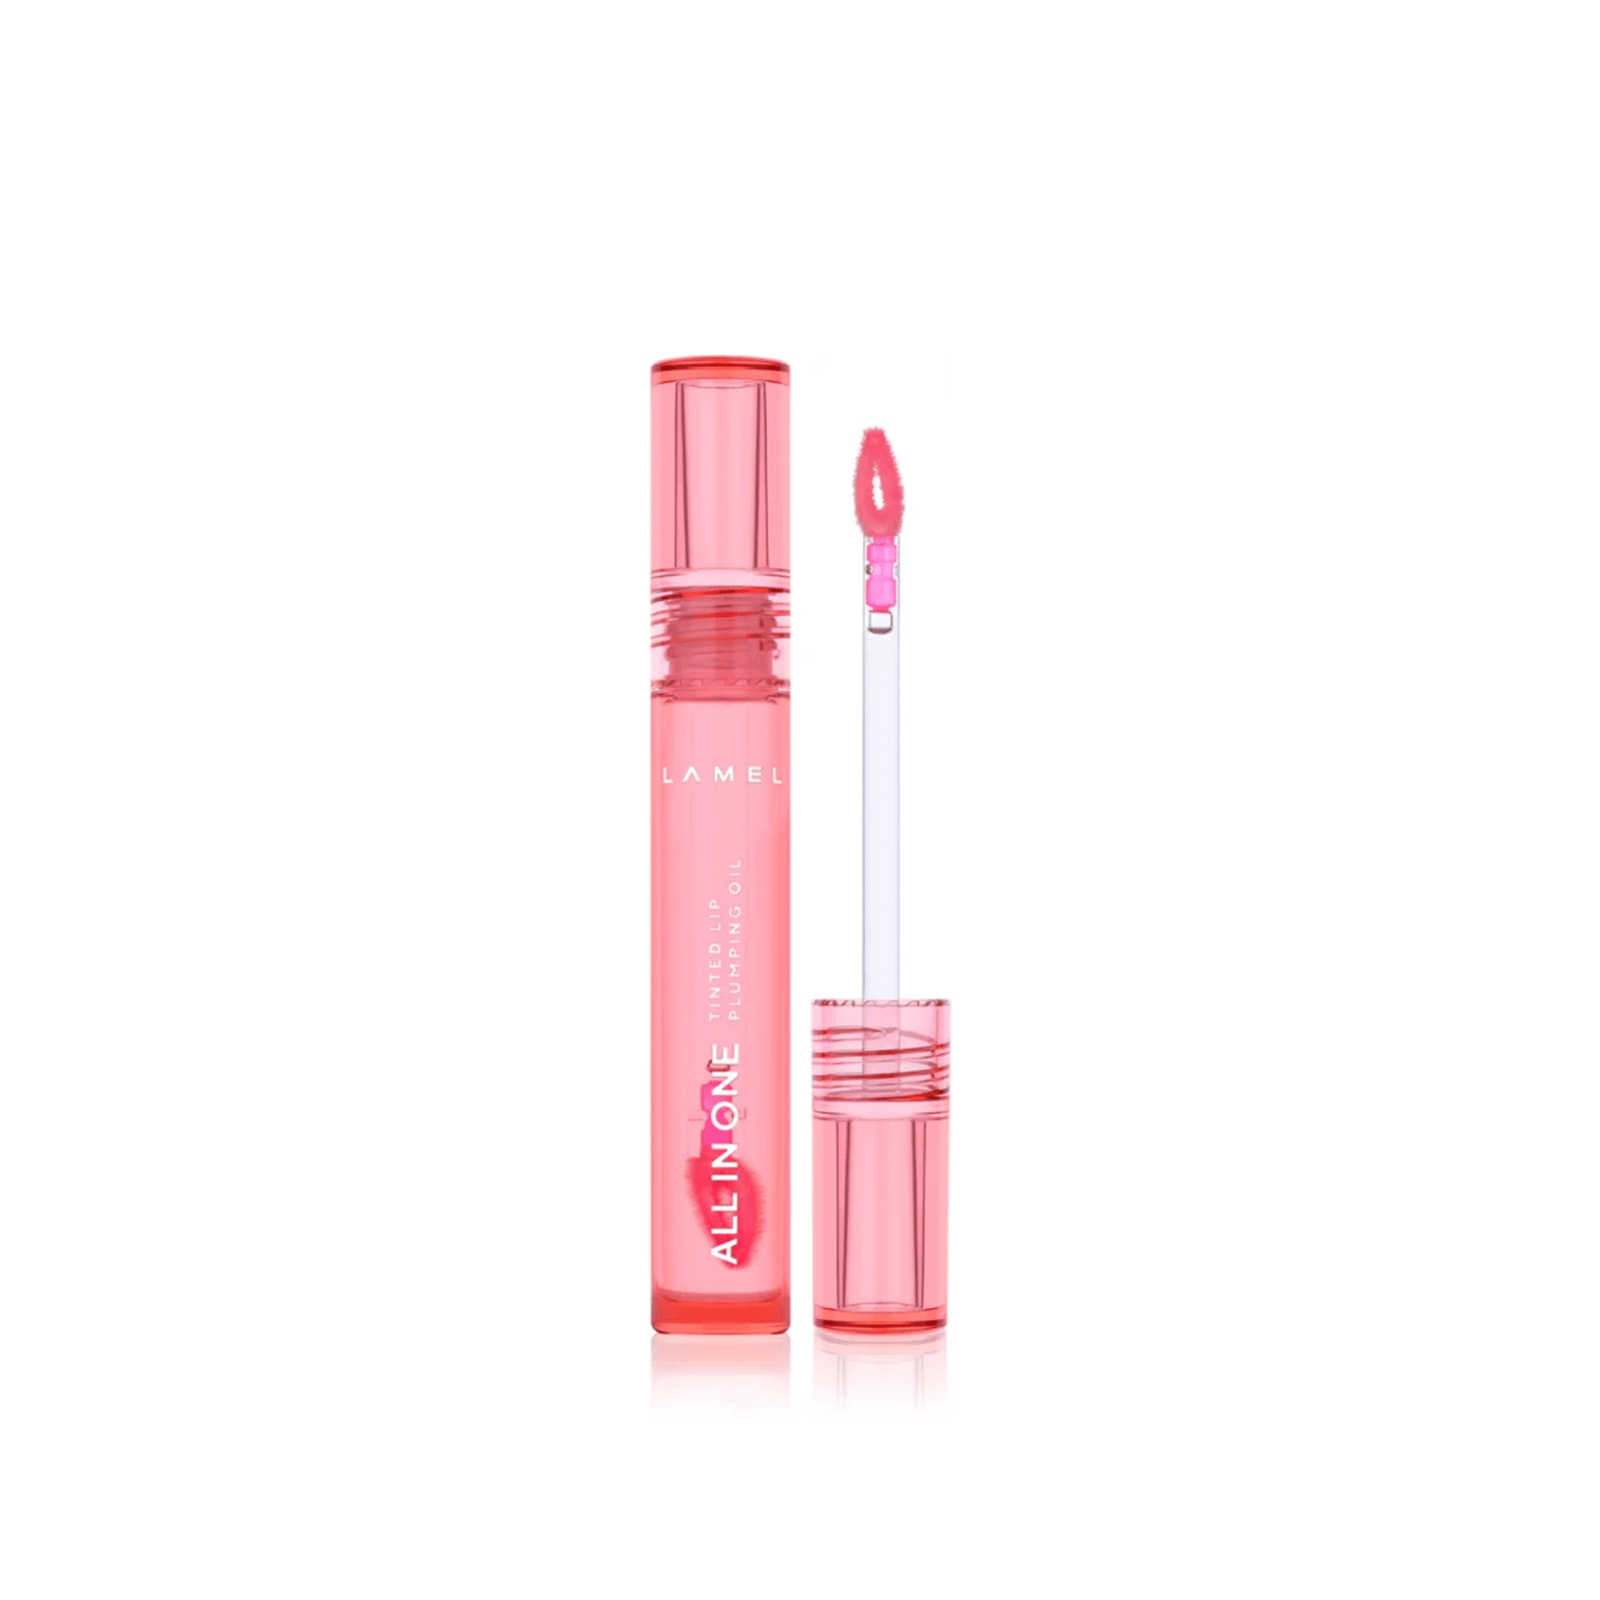 Lamel All In One Tinted Lip Plumping Oil 401 Peachy 3ml (0.1floz)